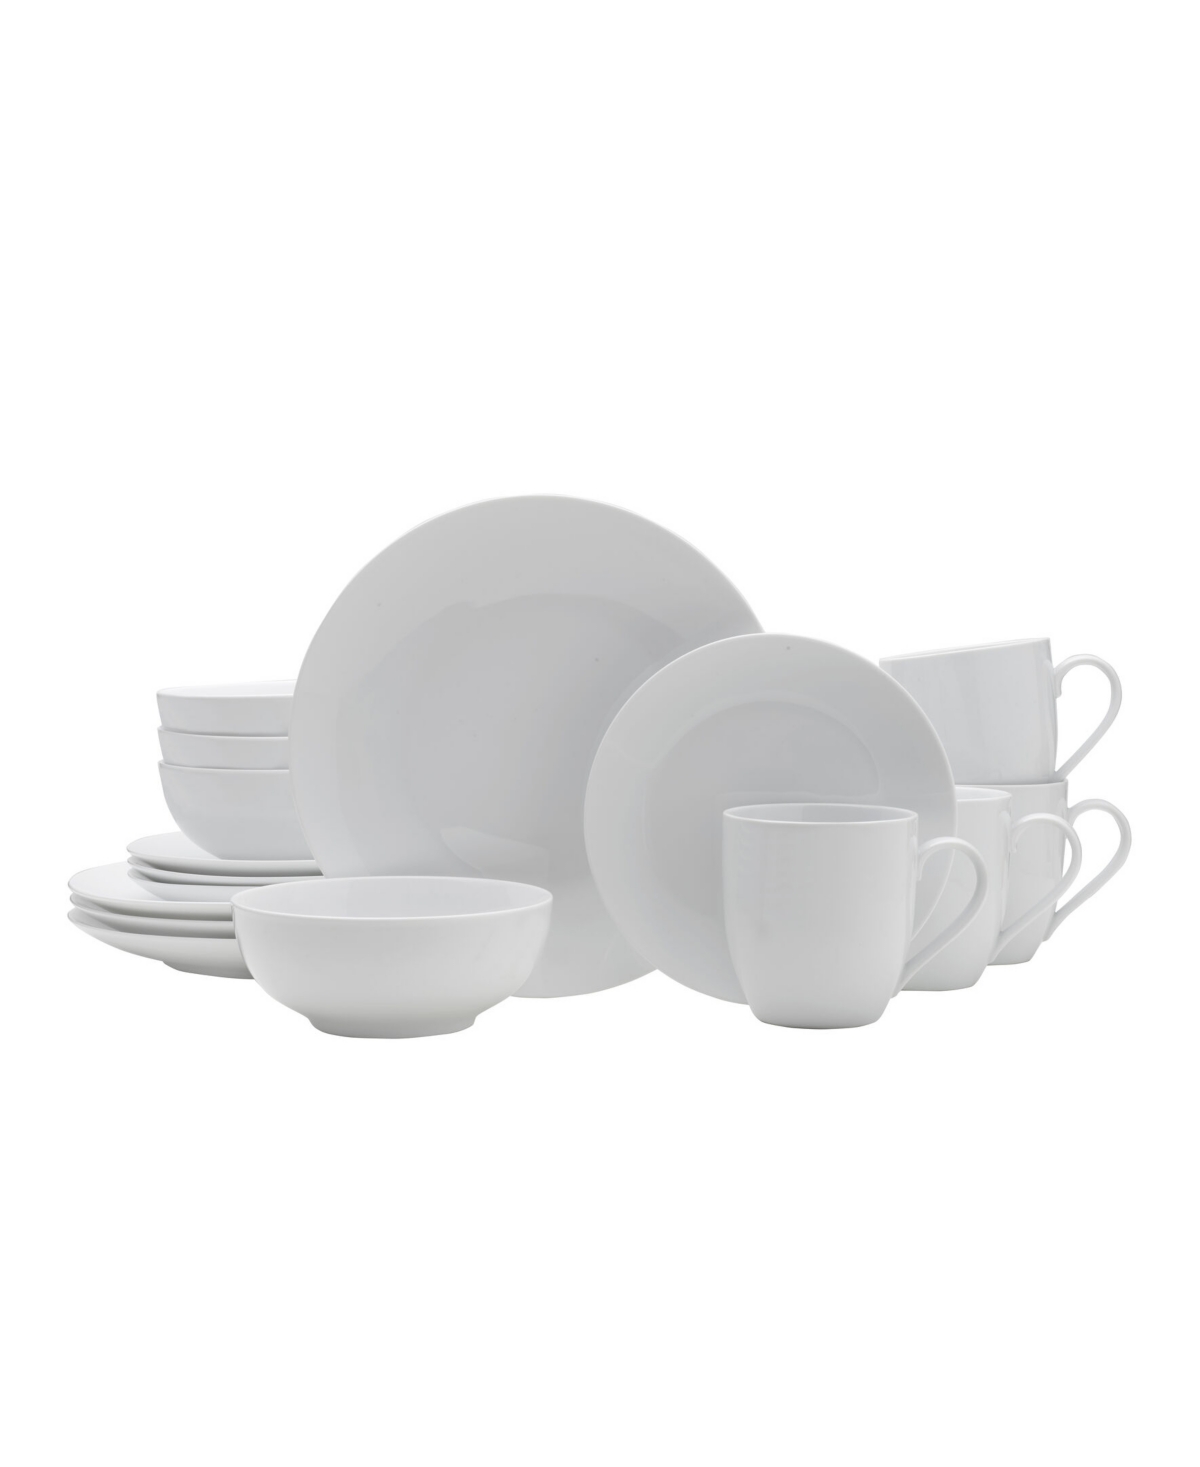 Everyday Whiteware Coupe 16 Piece Dinnerware Set, Service for 4 - White